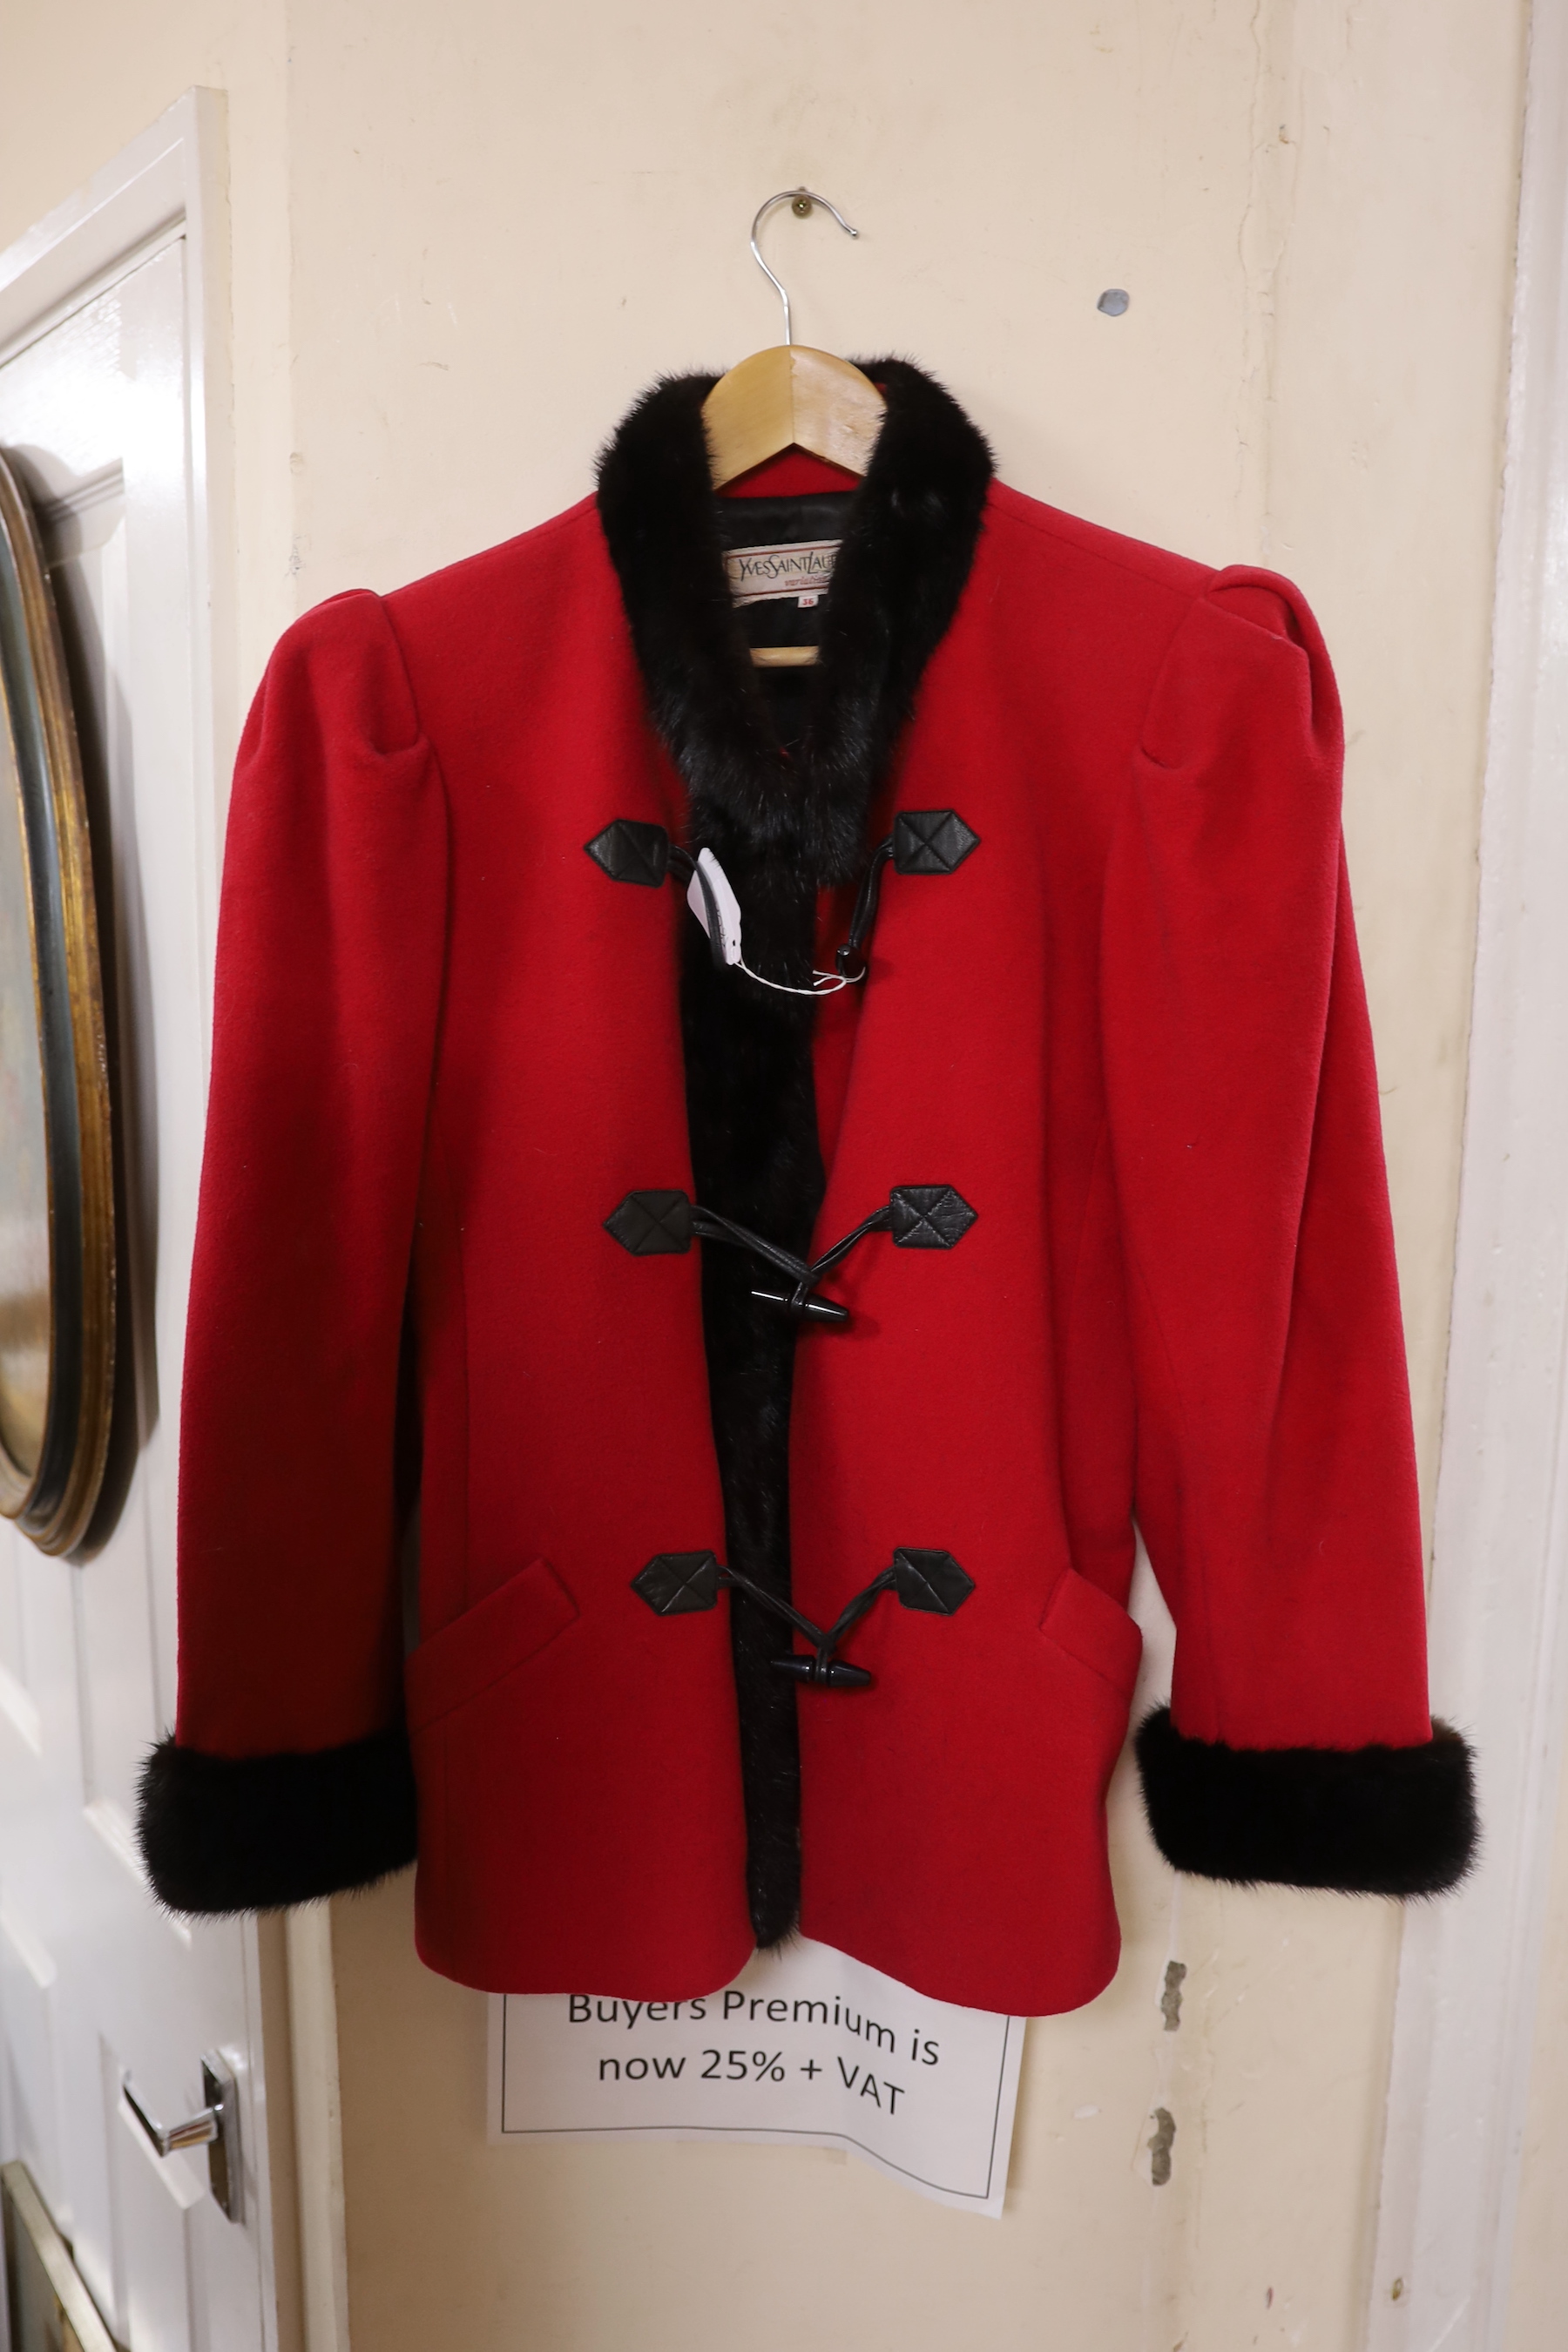 An Yves Saint Laurent ‘variation’, 1980's red wool jacket trimmed with black mink and leather toggle